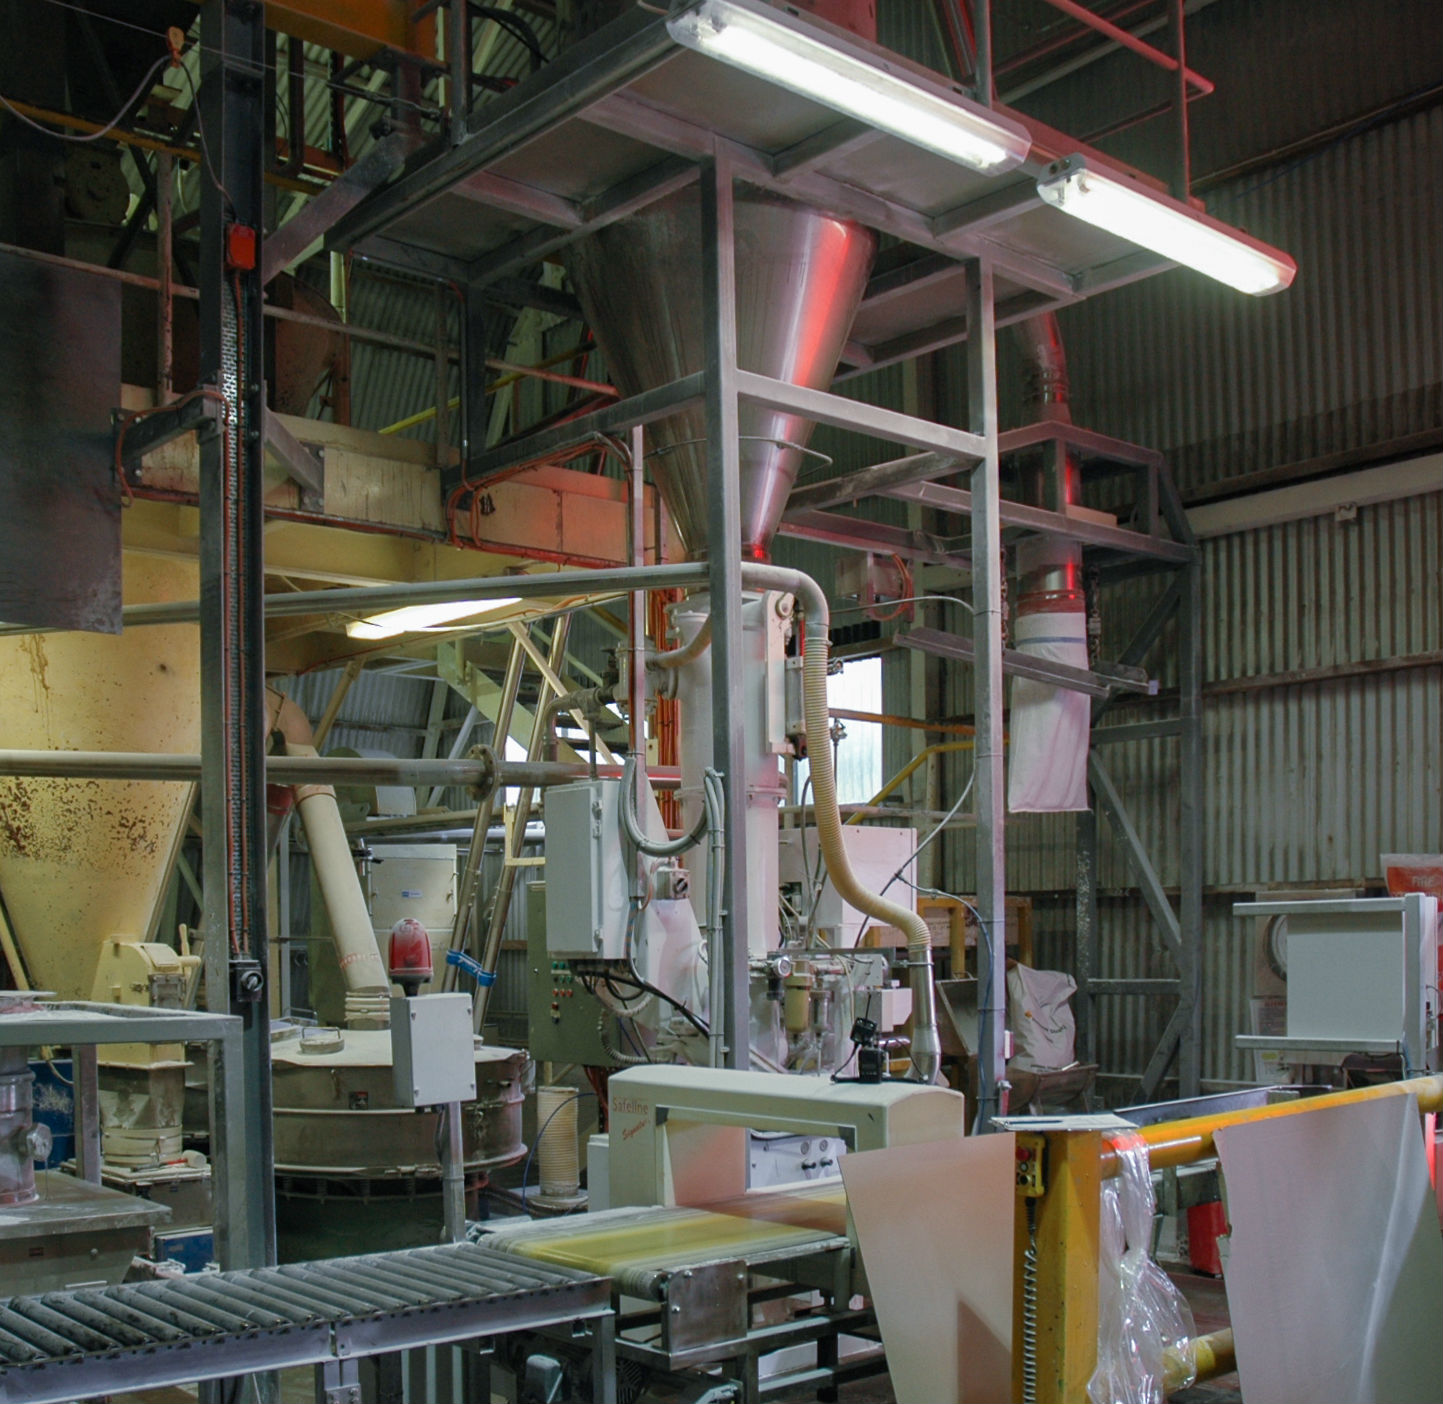 Ingredion - LED lights at industrial warehouse facility